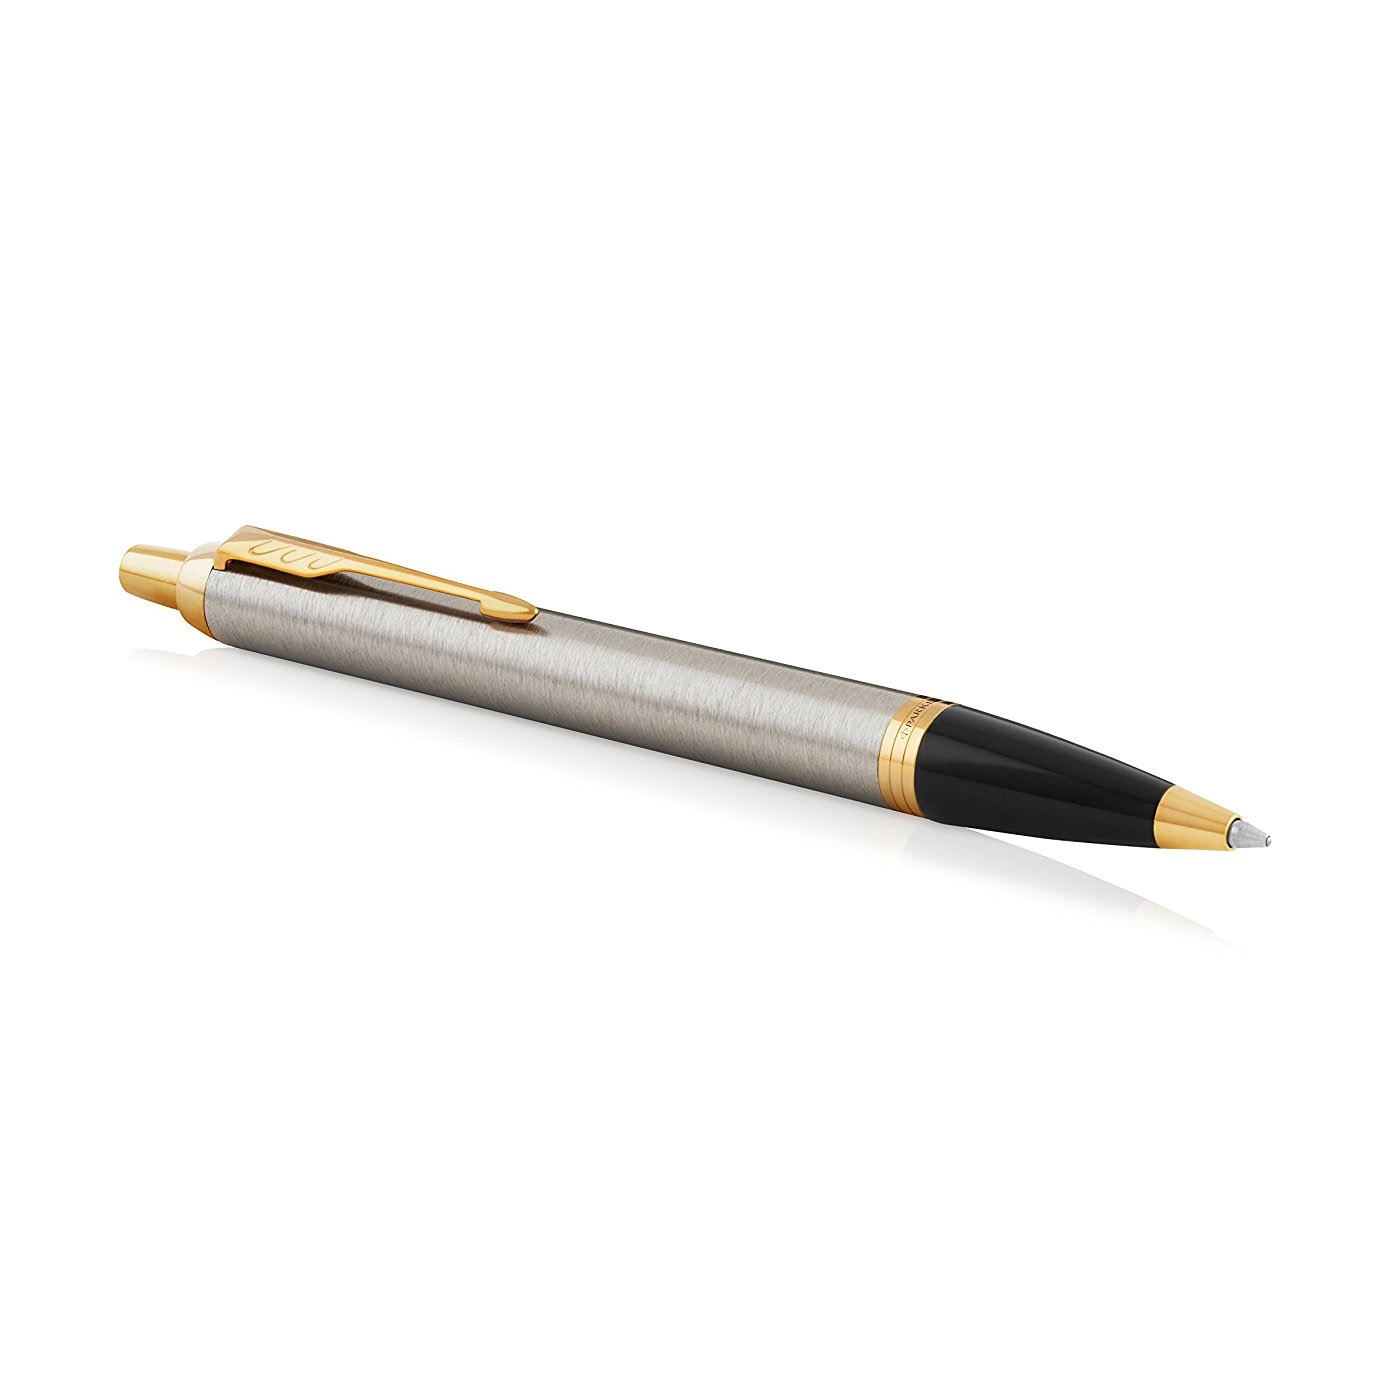 IM Brushed/Gold Ballpoint in the group Pens / Fine Writing / Ballpoint Pens at Pen Store (104675)